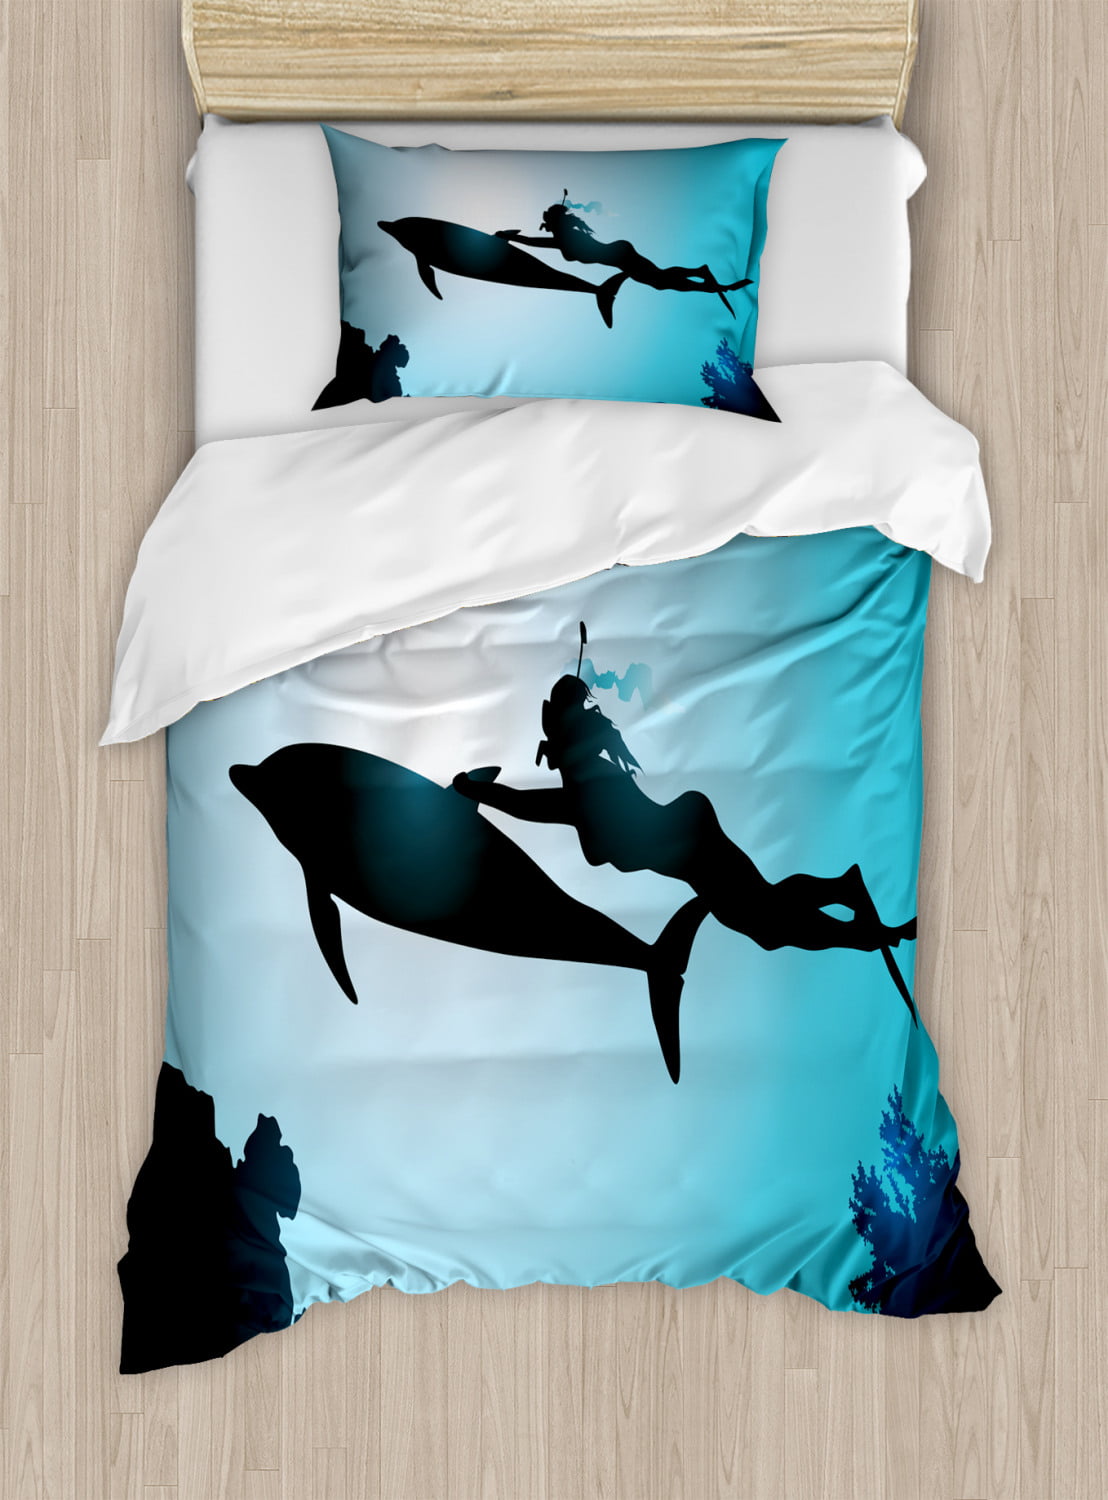 Dolphin Rose Bedding Set Girls Adult Full Fish Cartoon Dolphin Comforter Cover for Boys Girls Flower Fish Beauty Duvet Cover Breathable Bedspread Cover Room Decor Bedclothes 3pcs Bedding Set